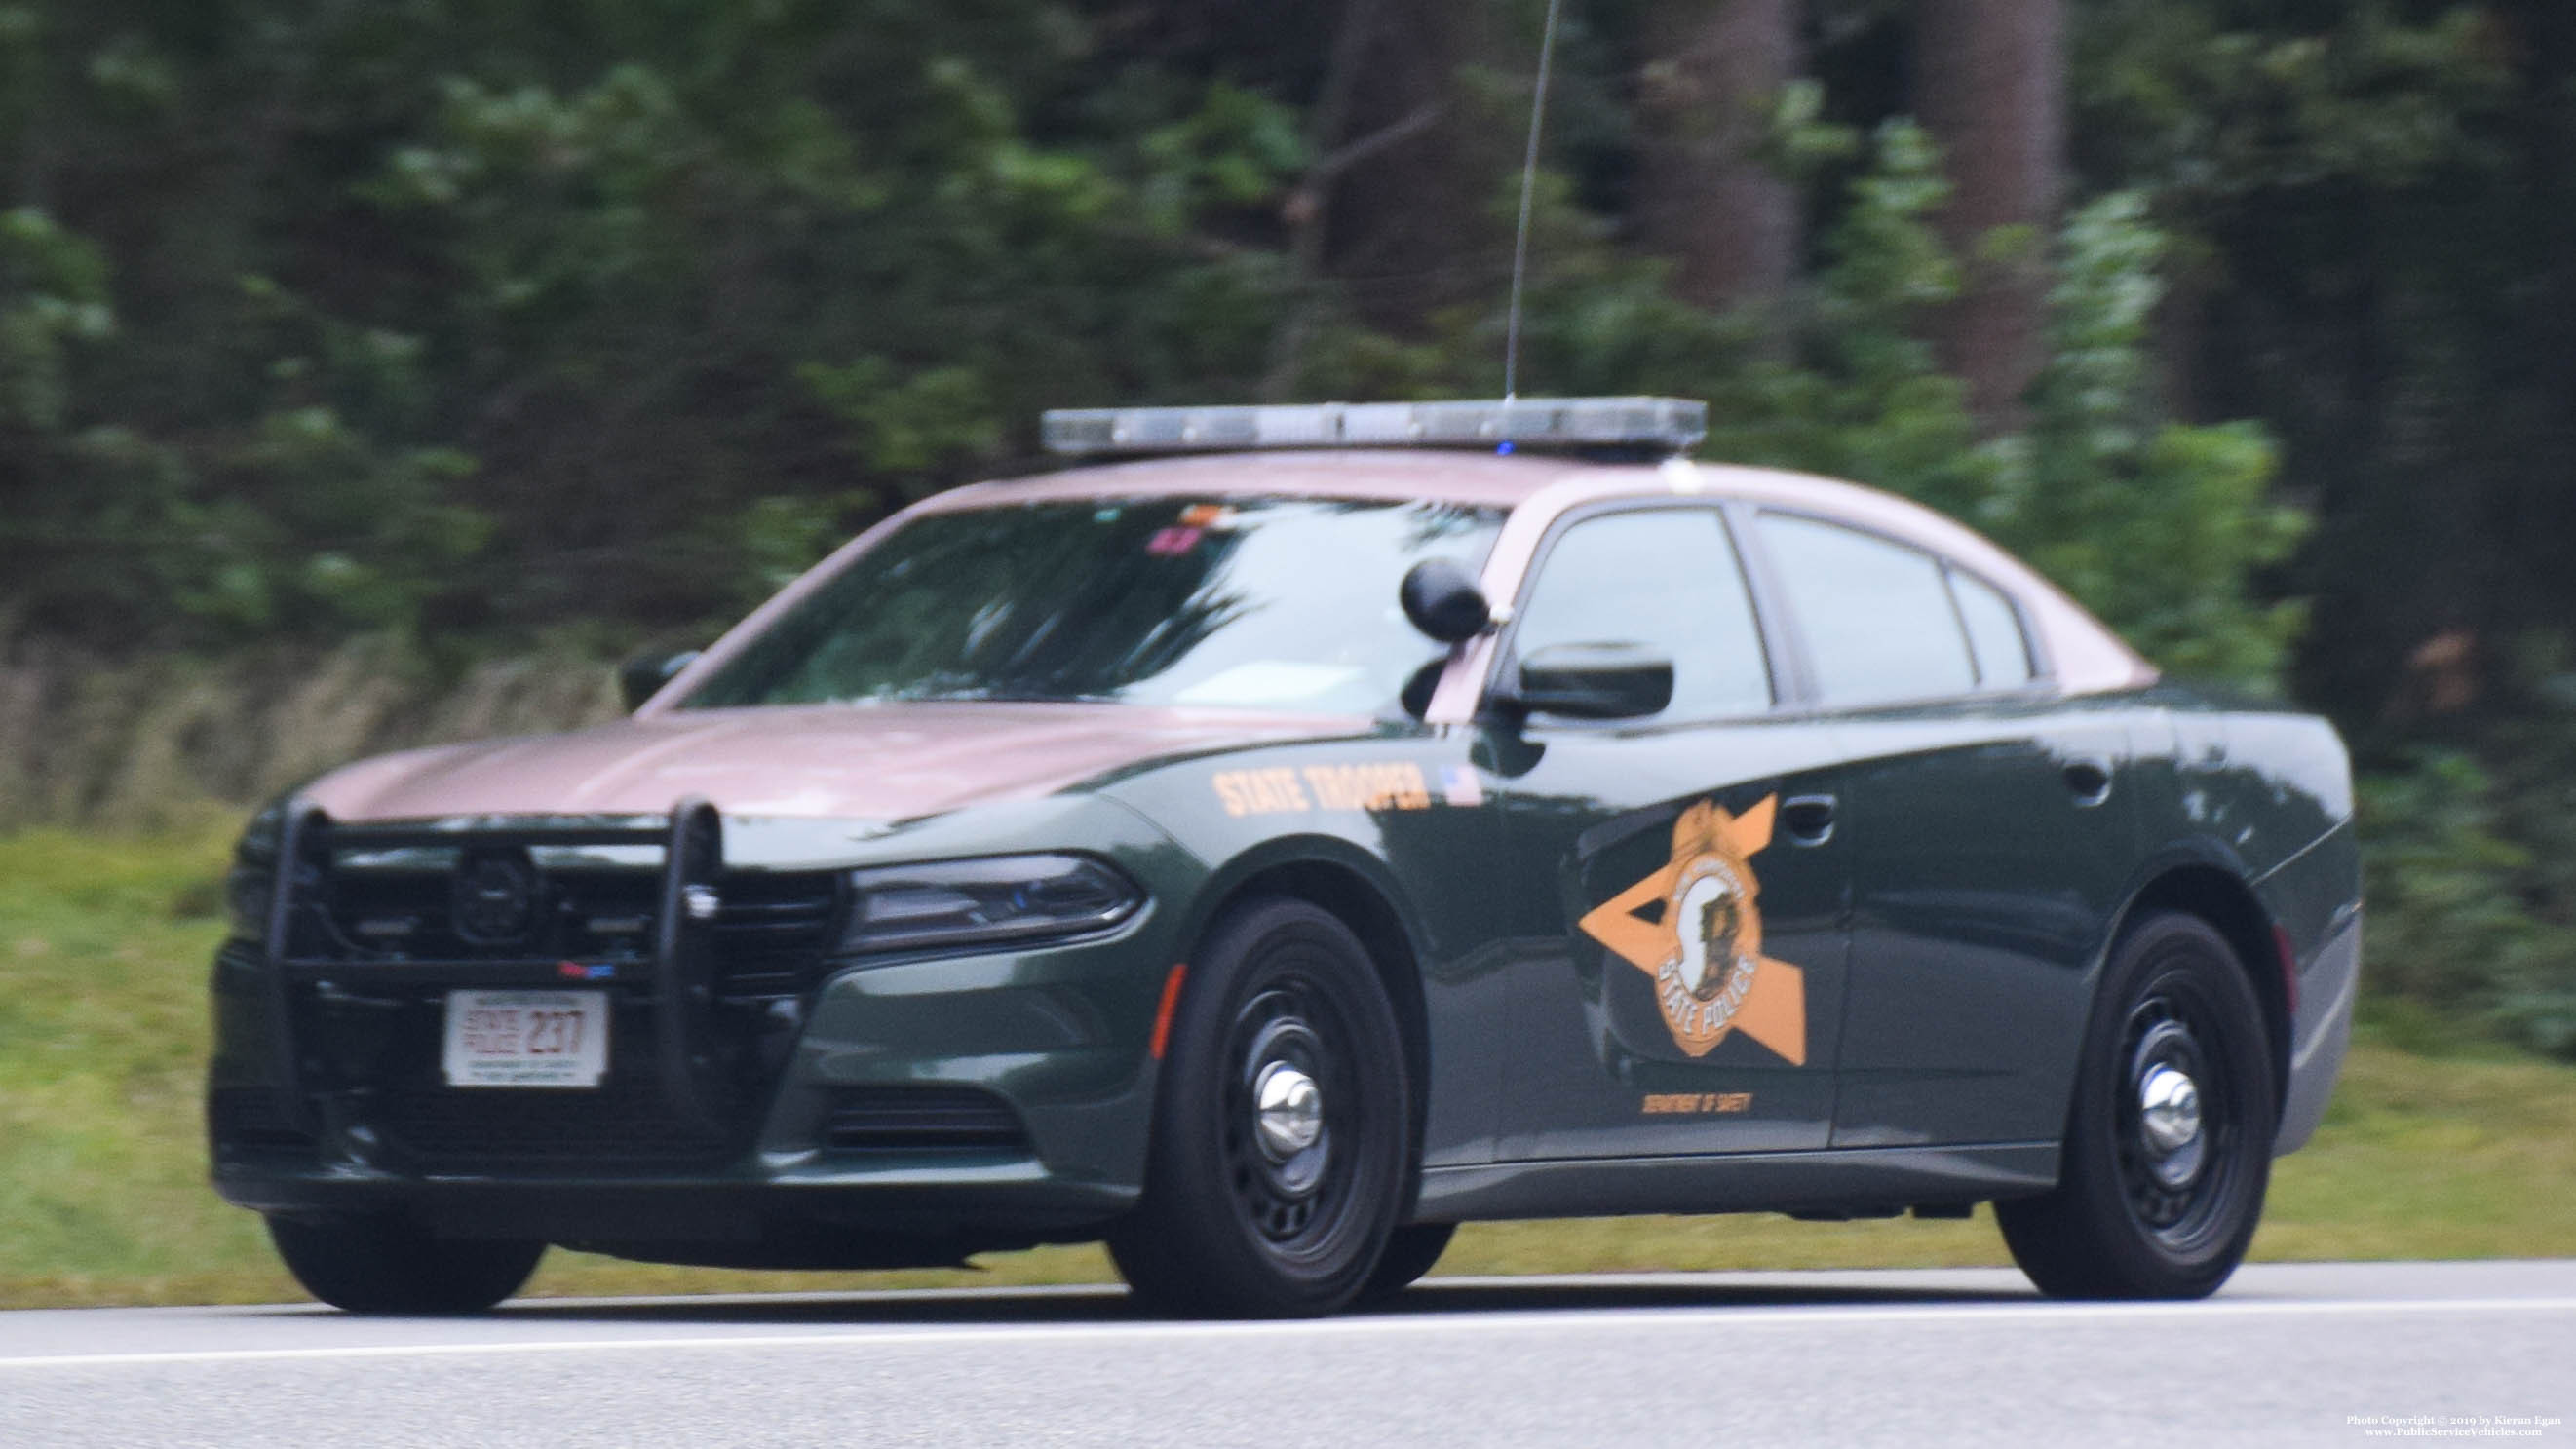 A photo  of New Hampshire State Police
            Cruiser 237, a 2015-2019 Dodge Charger             taken by Kieran Egan